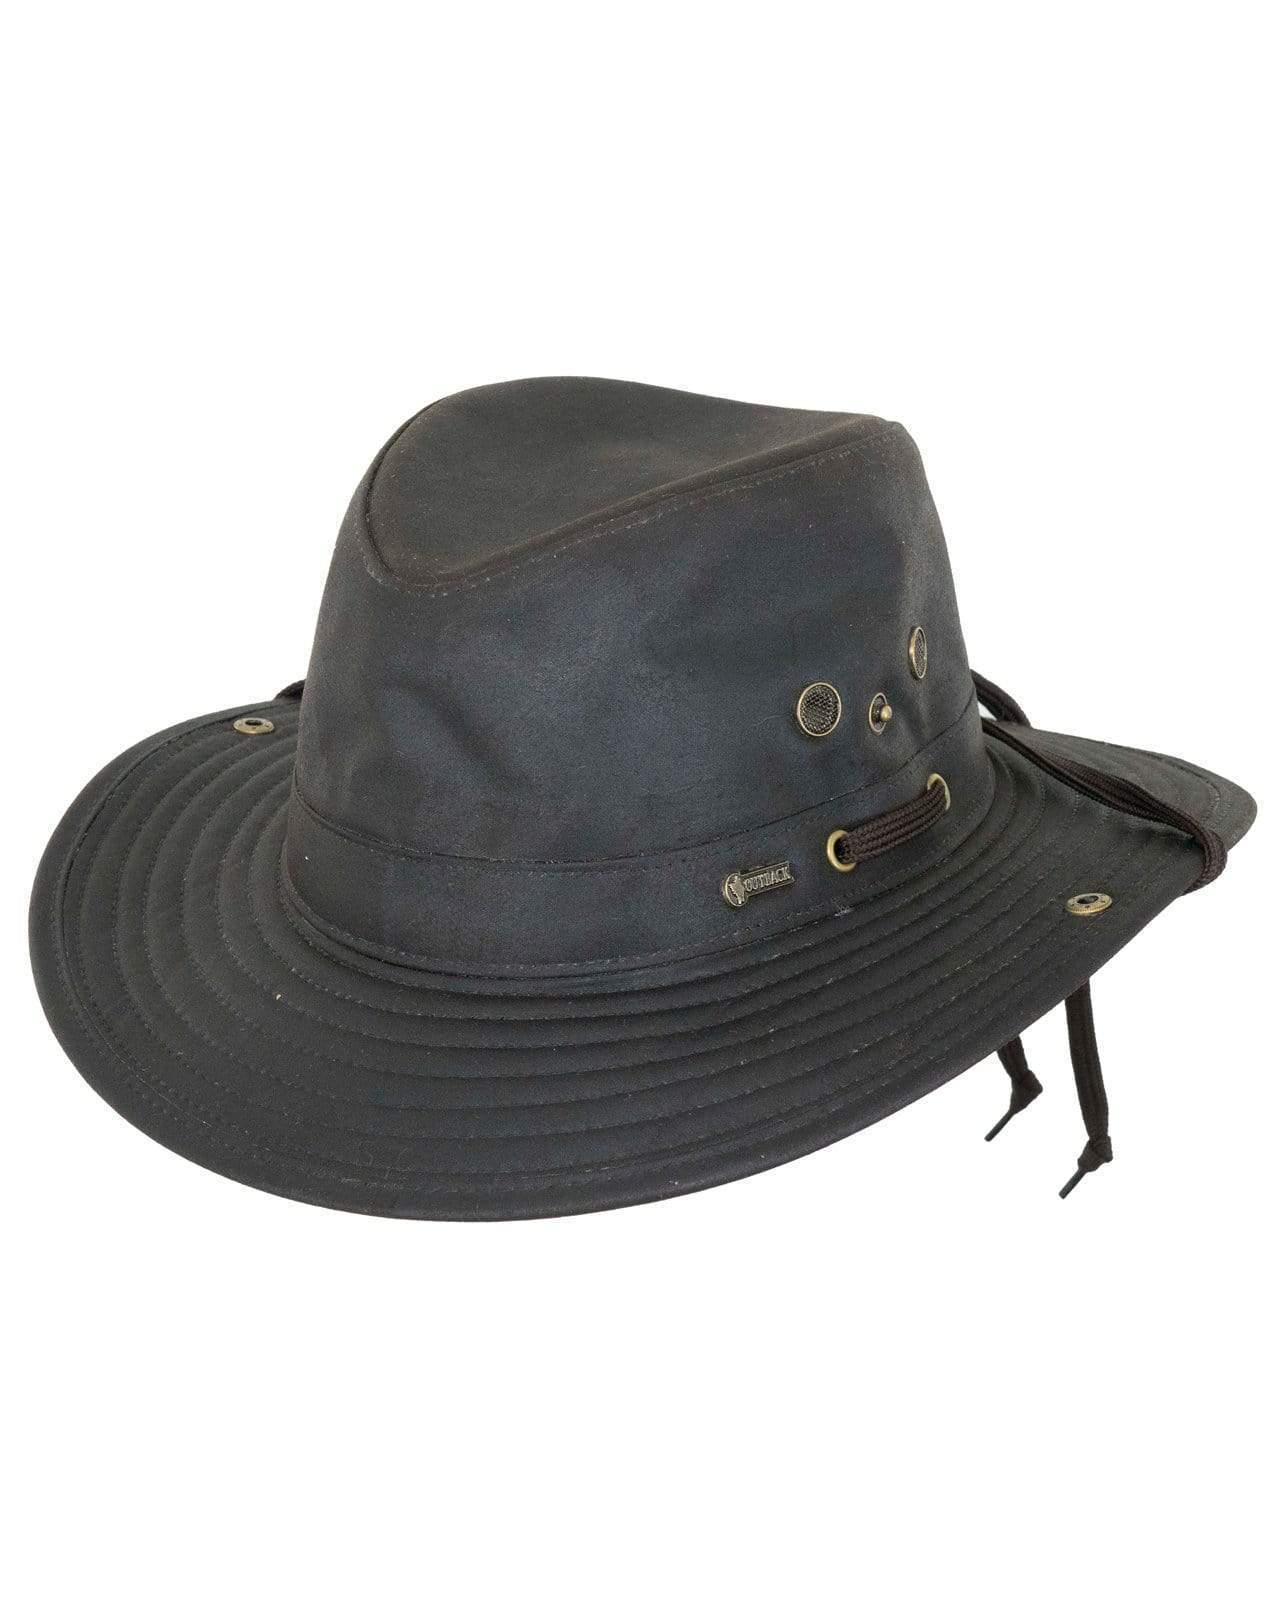 River Guide  Oilskin Hats by Outback Trading Company –